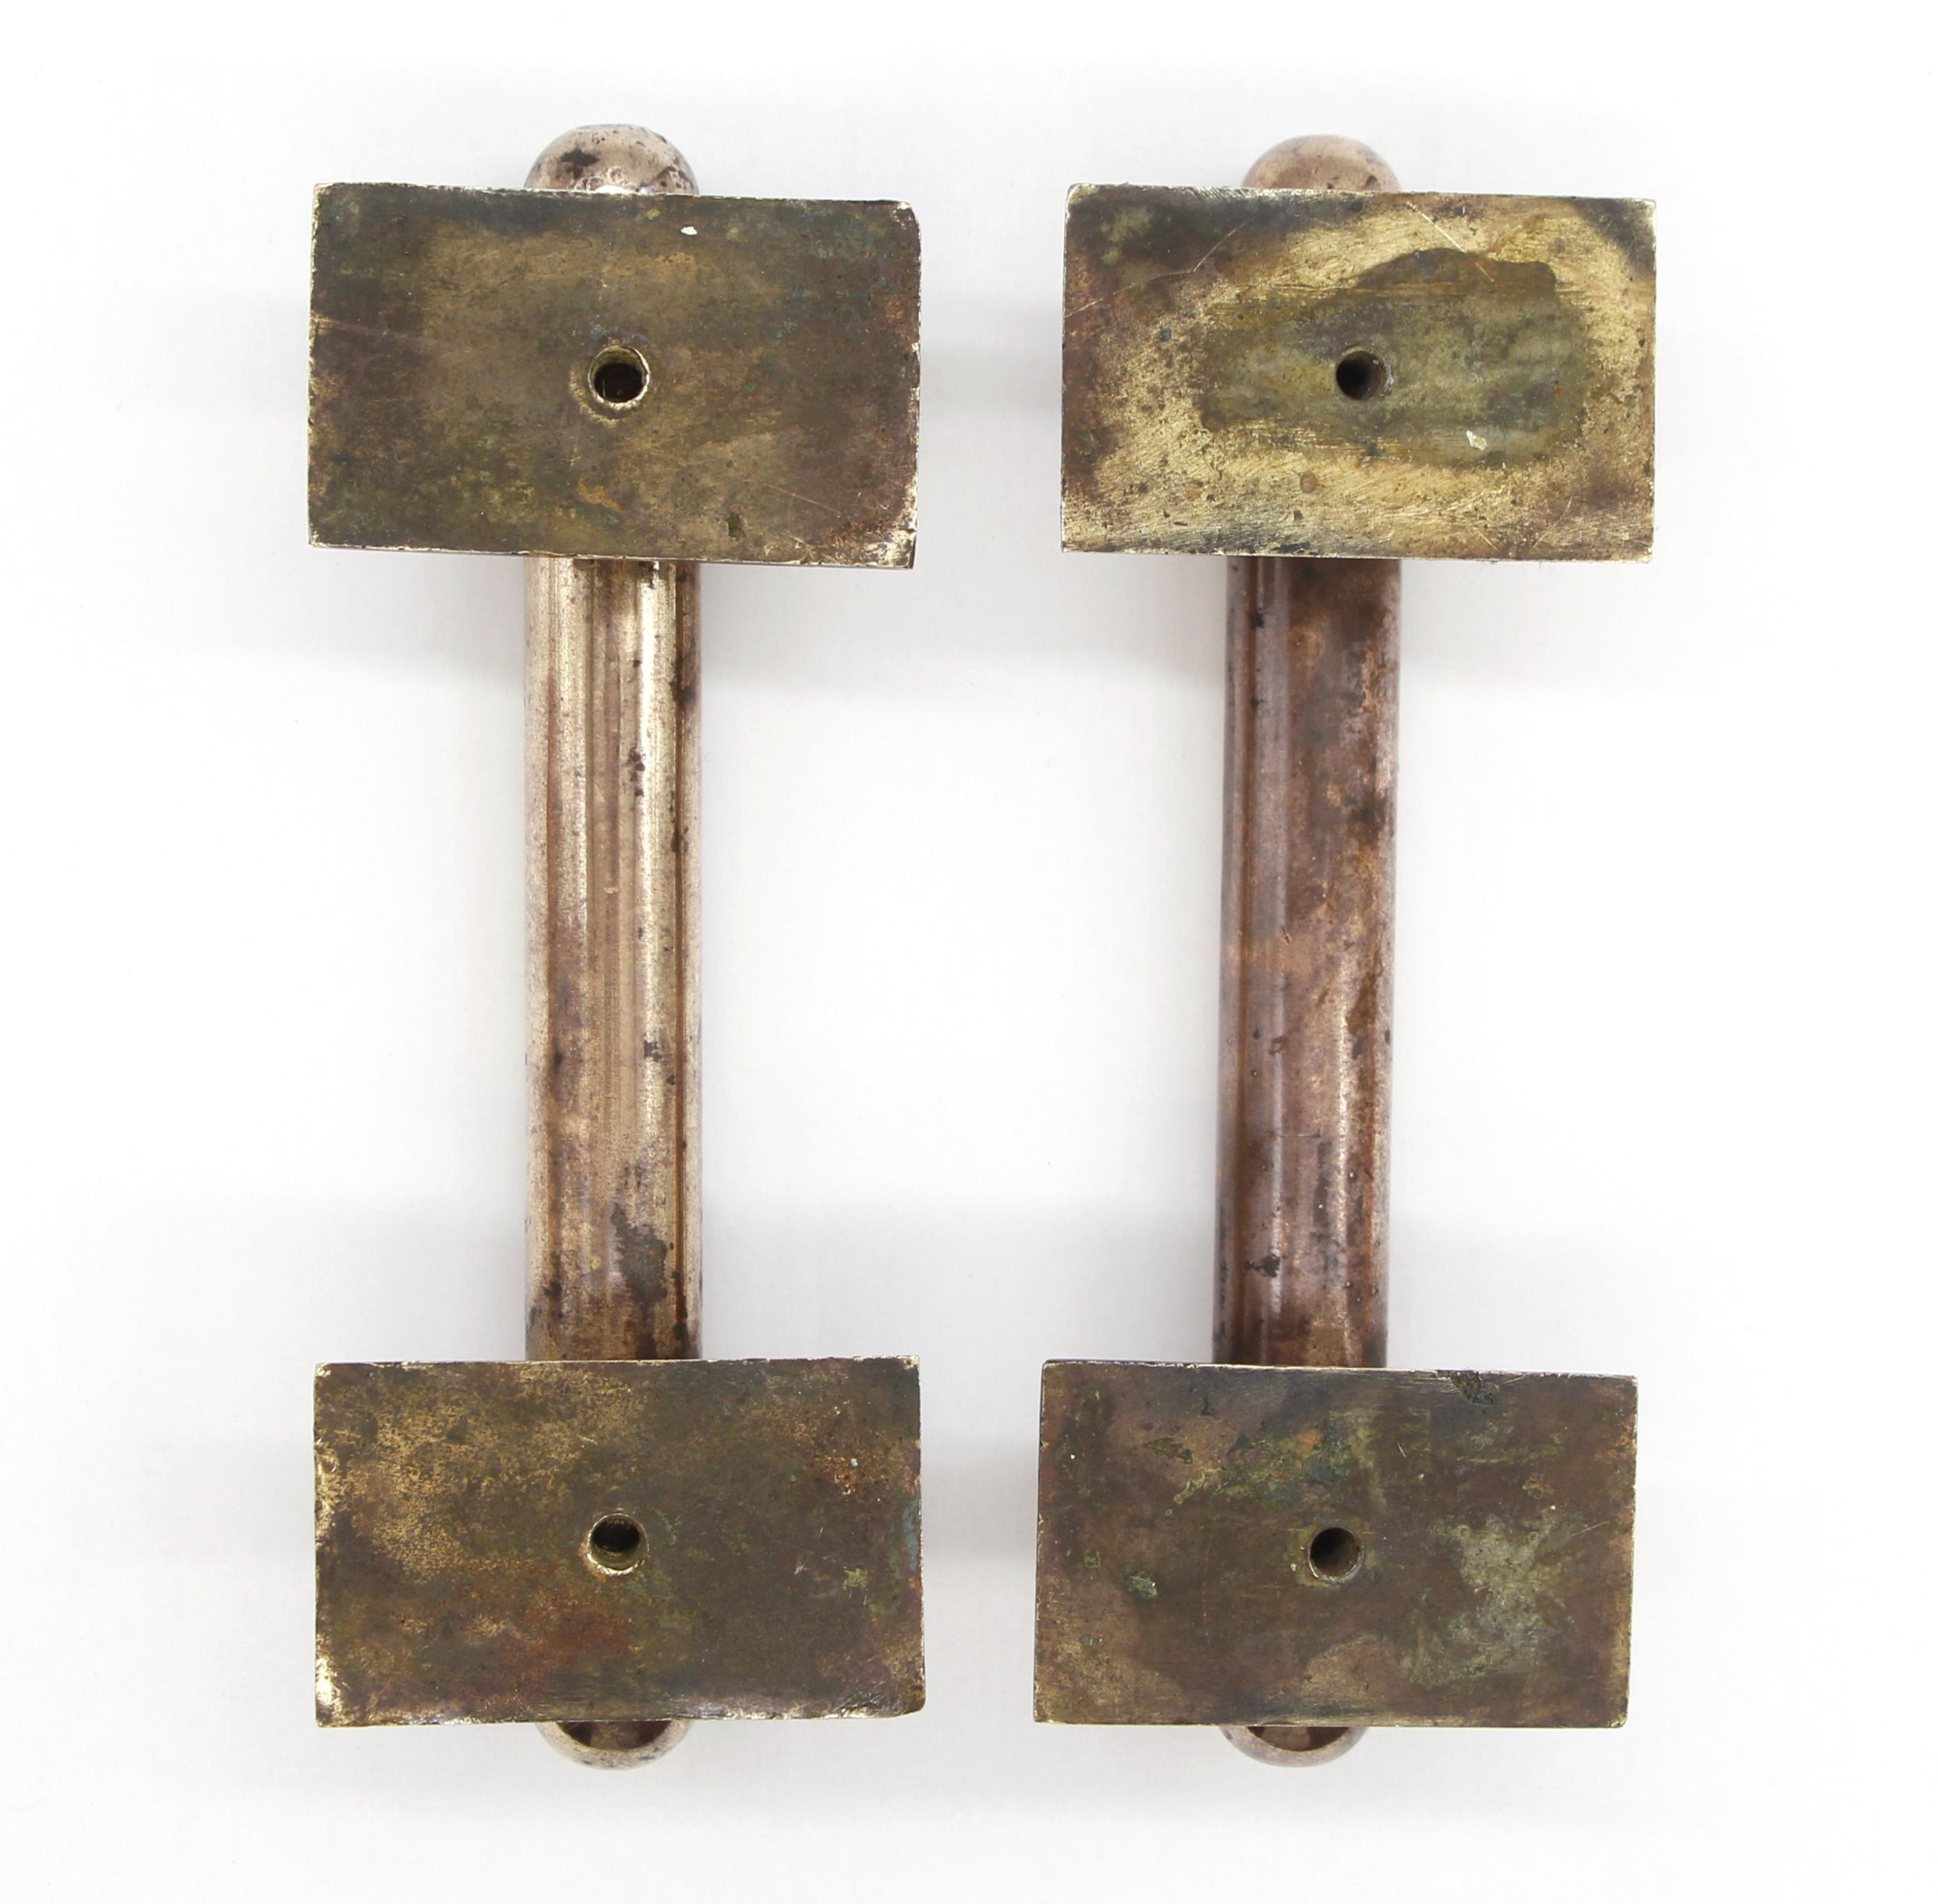 Pair of solid bronze handles or door pulls that have been cleaned and polished to a bright and shiny patina. Good condition with appropriate wear from age. Priced as a pair. Please note, this item is located in our Scranton, PA location.